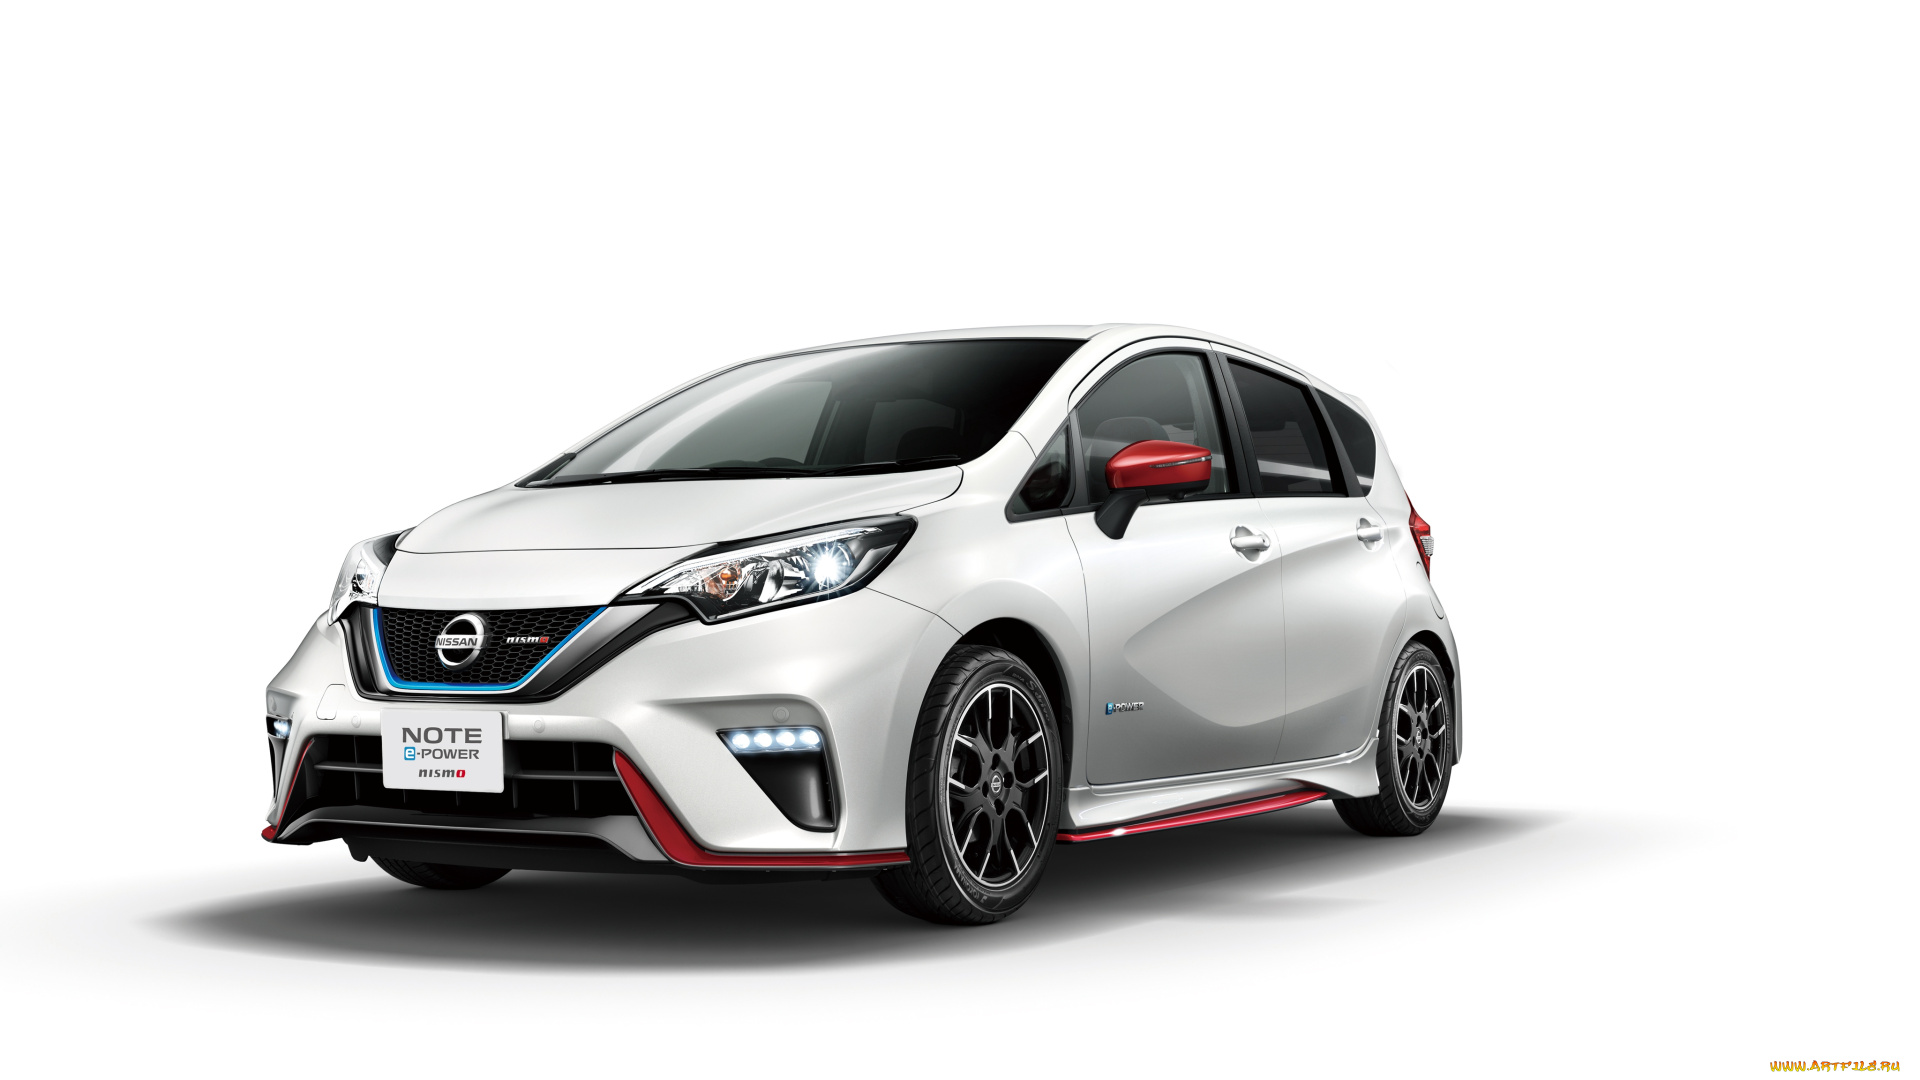 Nissan note 2020. Nissan Note e-Power Nismo. Ниссан ноут нисмо 2020. Nissan Note e-Power Nismo 2021. Nissan Note e-Power 2018.